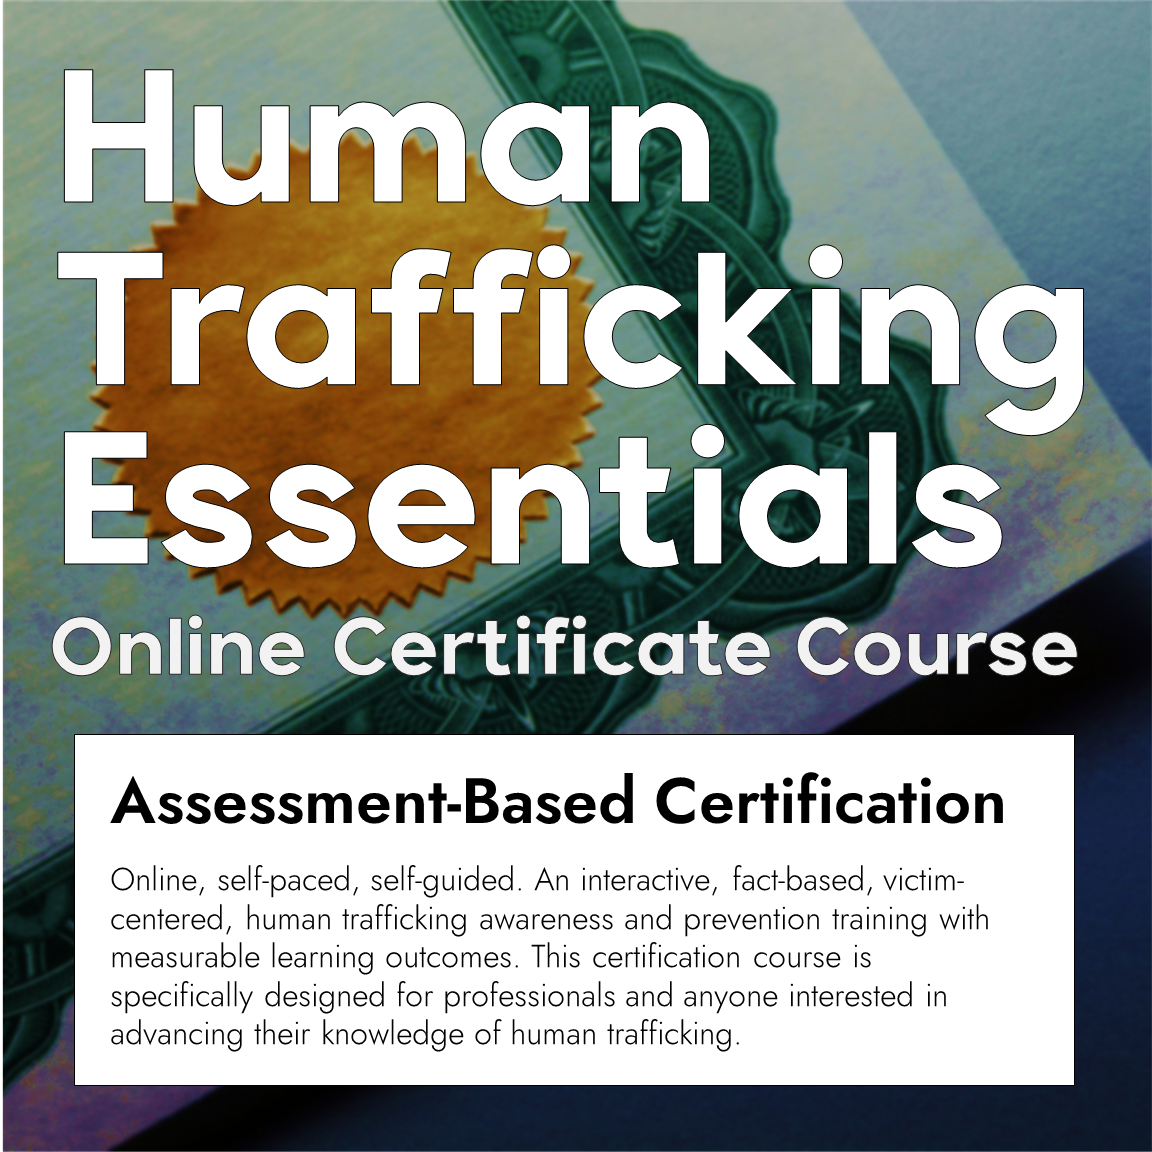 Human Trafficking Essentials Online Certificate Course. Online courses and online learning.